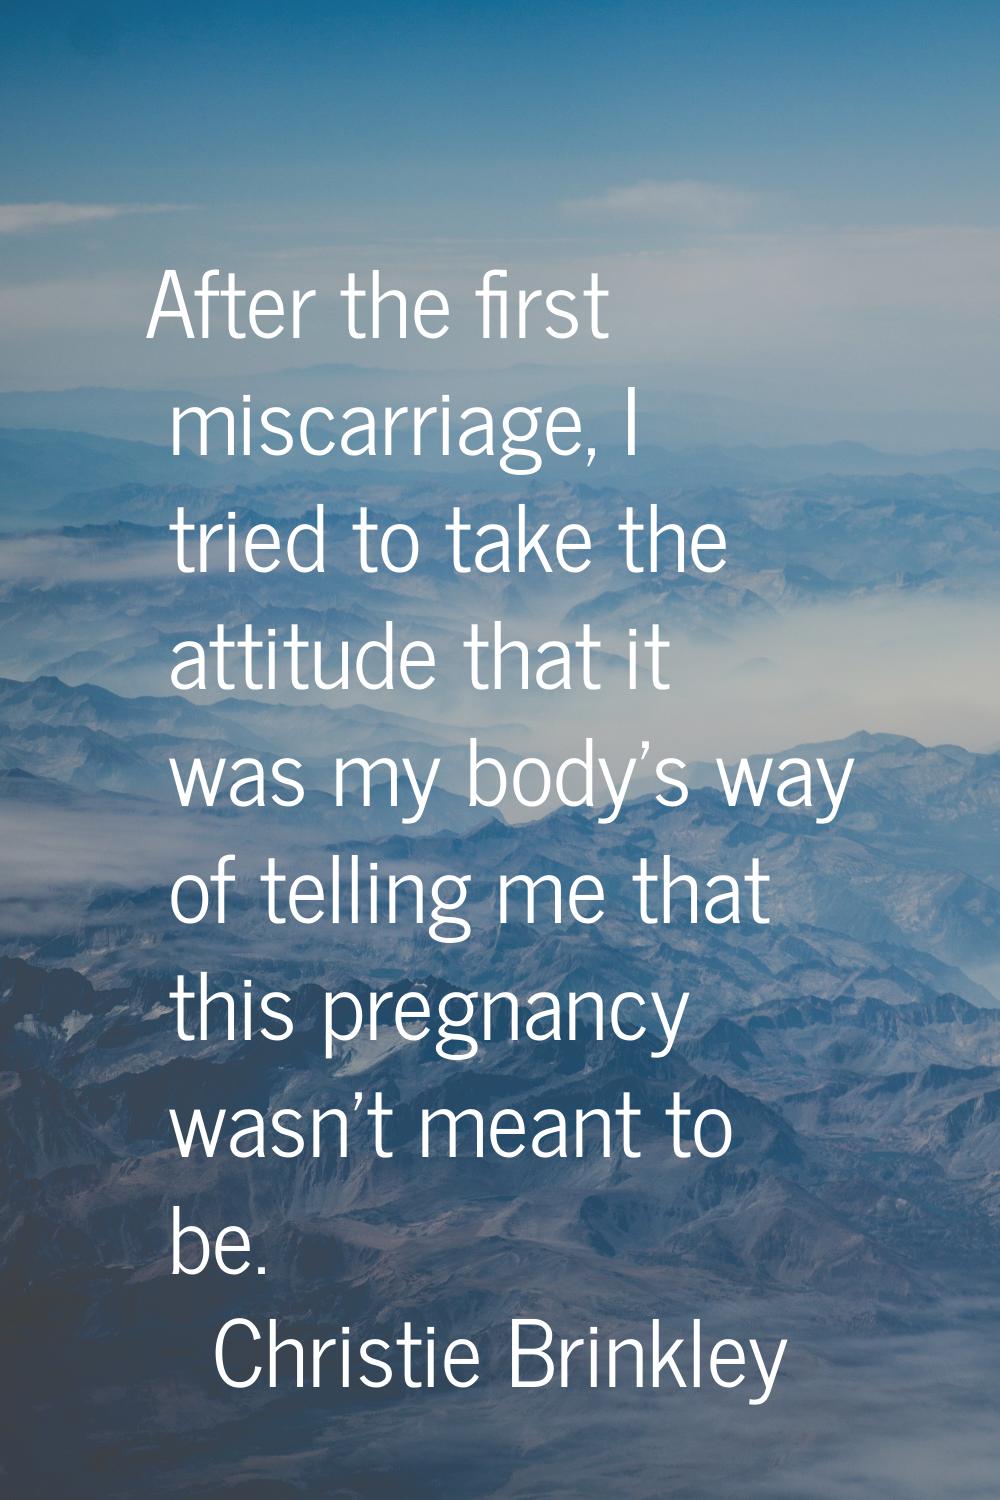 After the first miscarriage, I tried to take the attitude that it was my body's way of telling me t